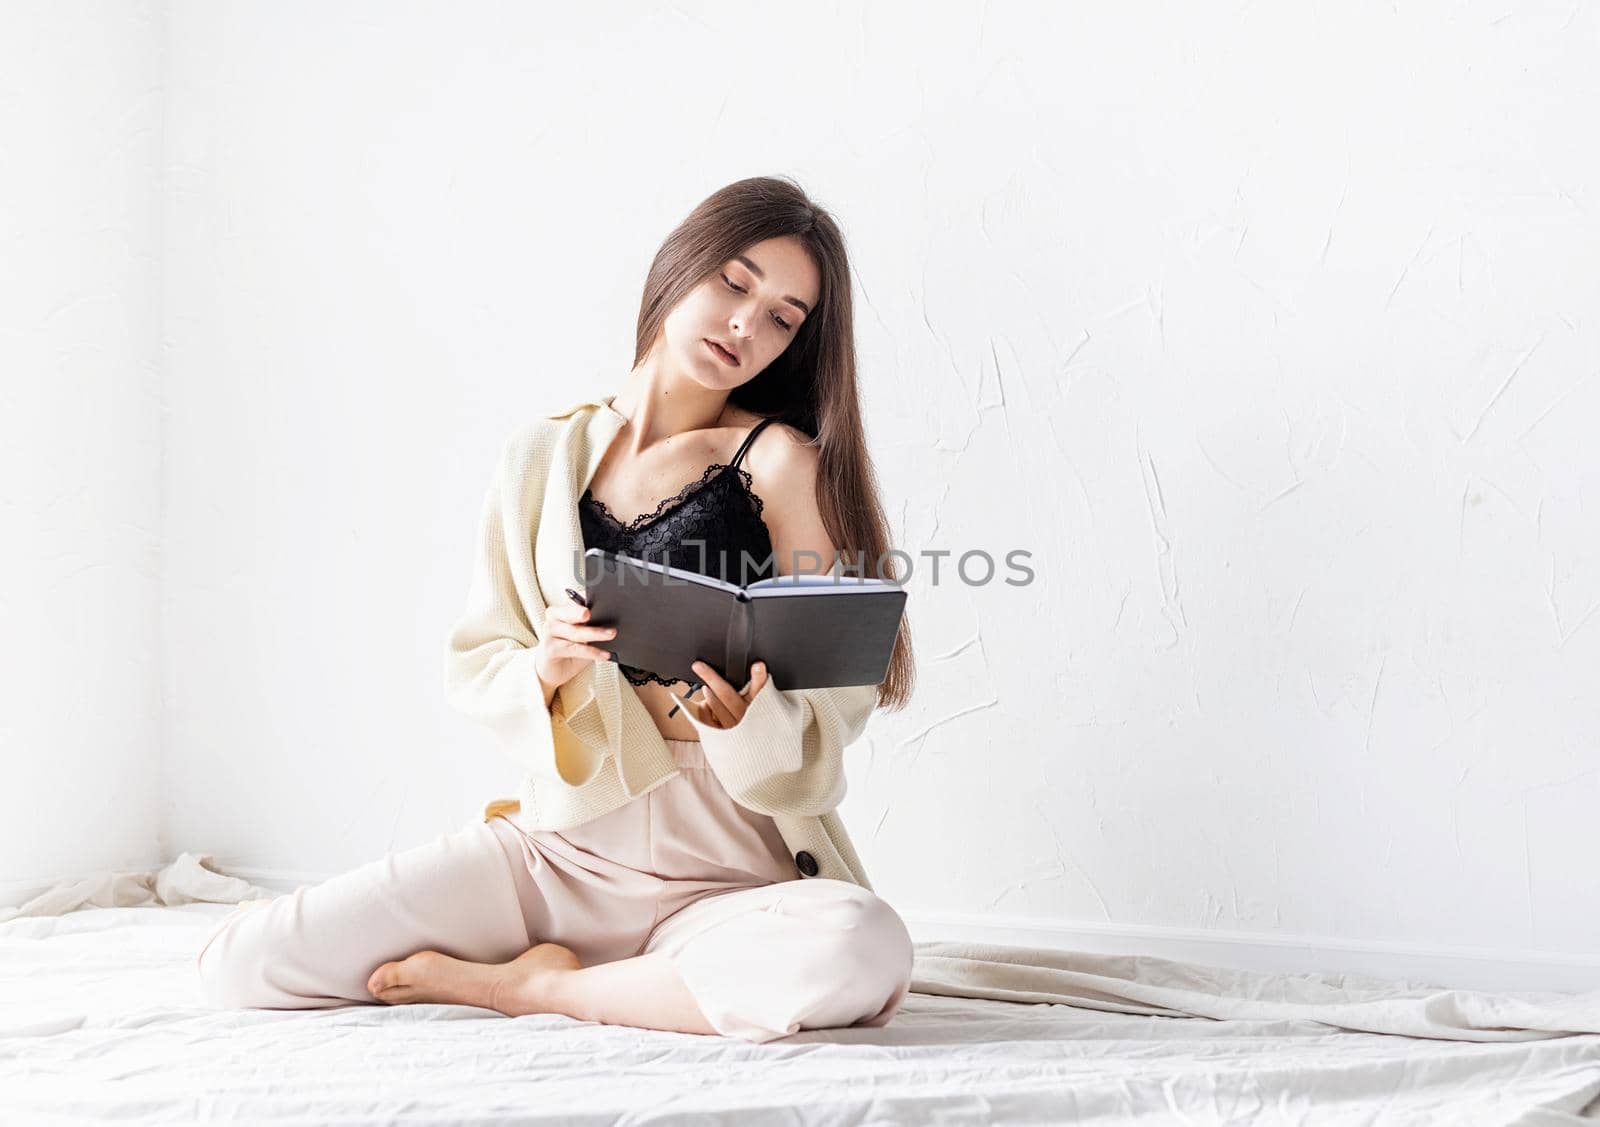 Beautiful sexy woman in comfy home clothes writing notes sitting on the floor, thinking